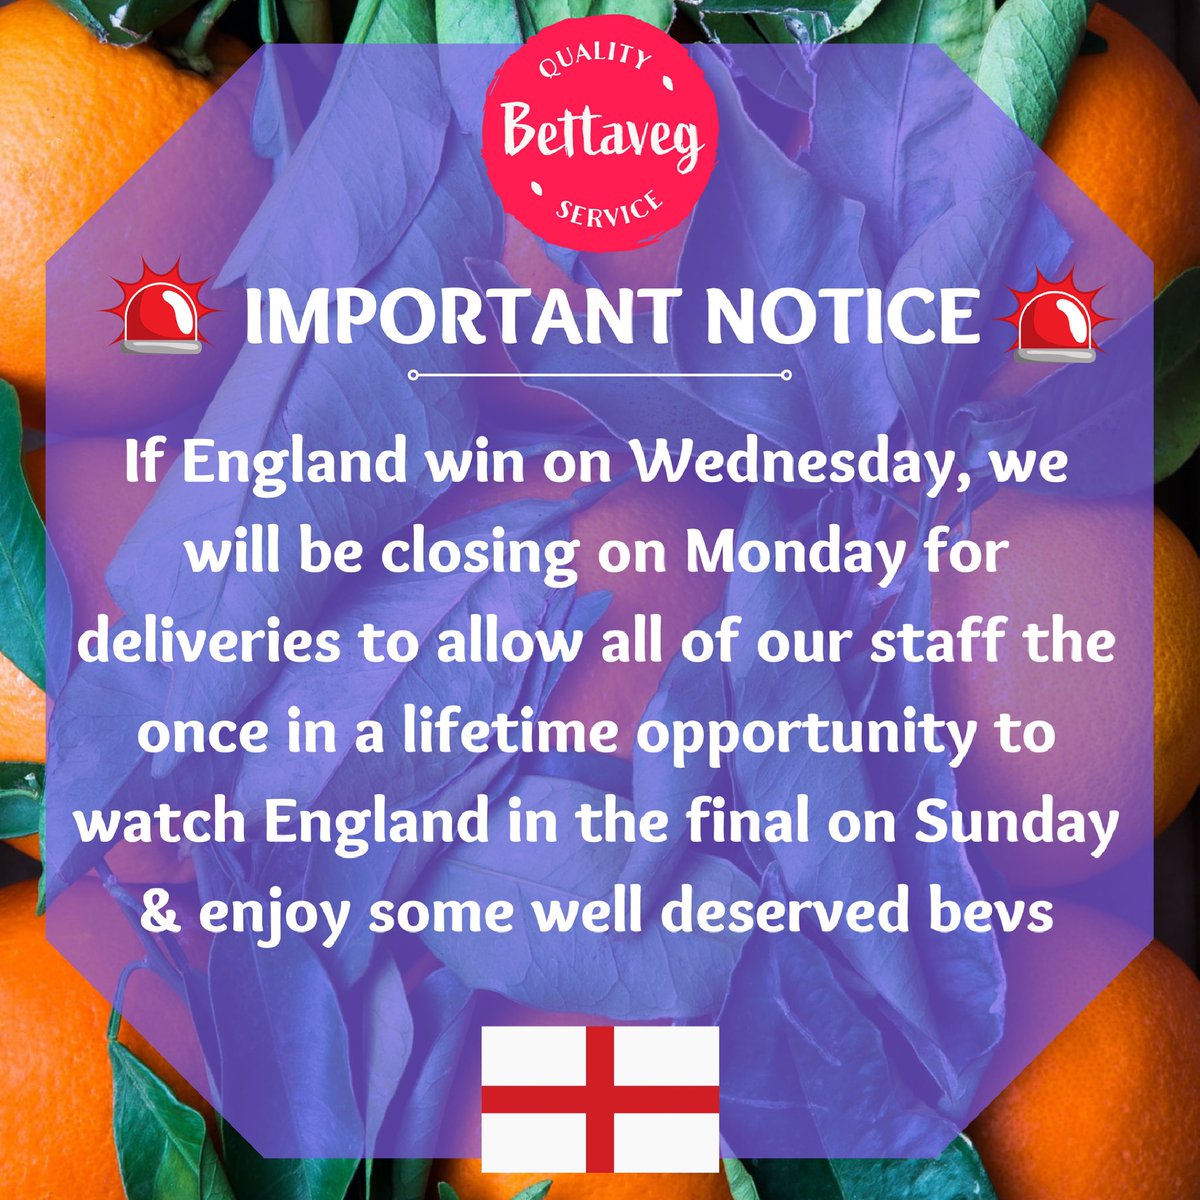 Heads up to all of our customers, we will be giving all staff a day off on Monday if England get into the final as a thank you for their continued hard work. We will be back open for deliveries on Tuesday. We appreciate your understanding ⚽️🏴󠁧󠁢󠁥󠁮󠁧󠁿